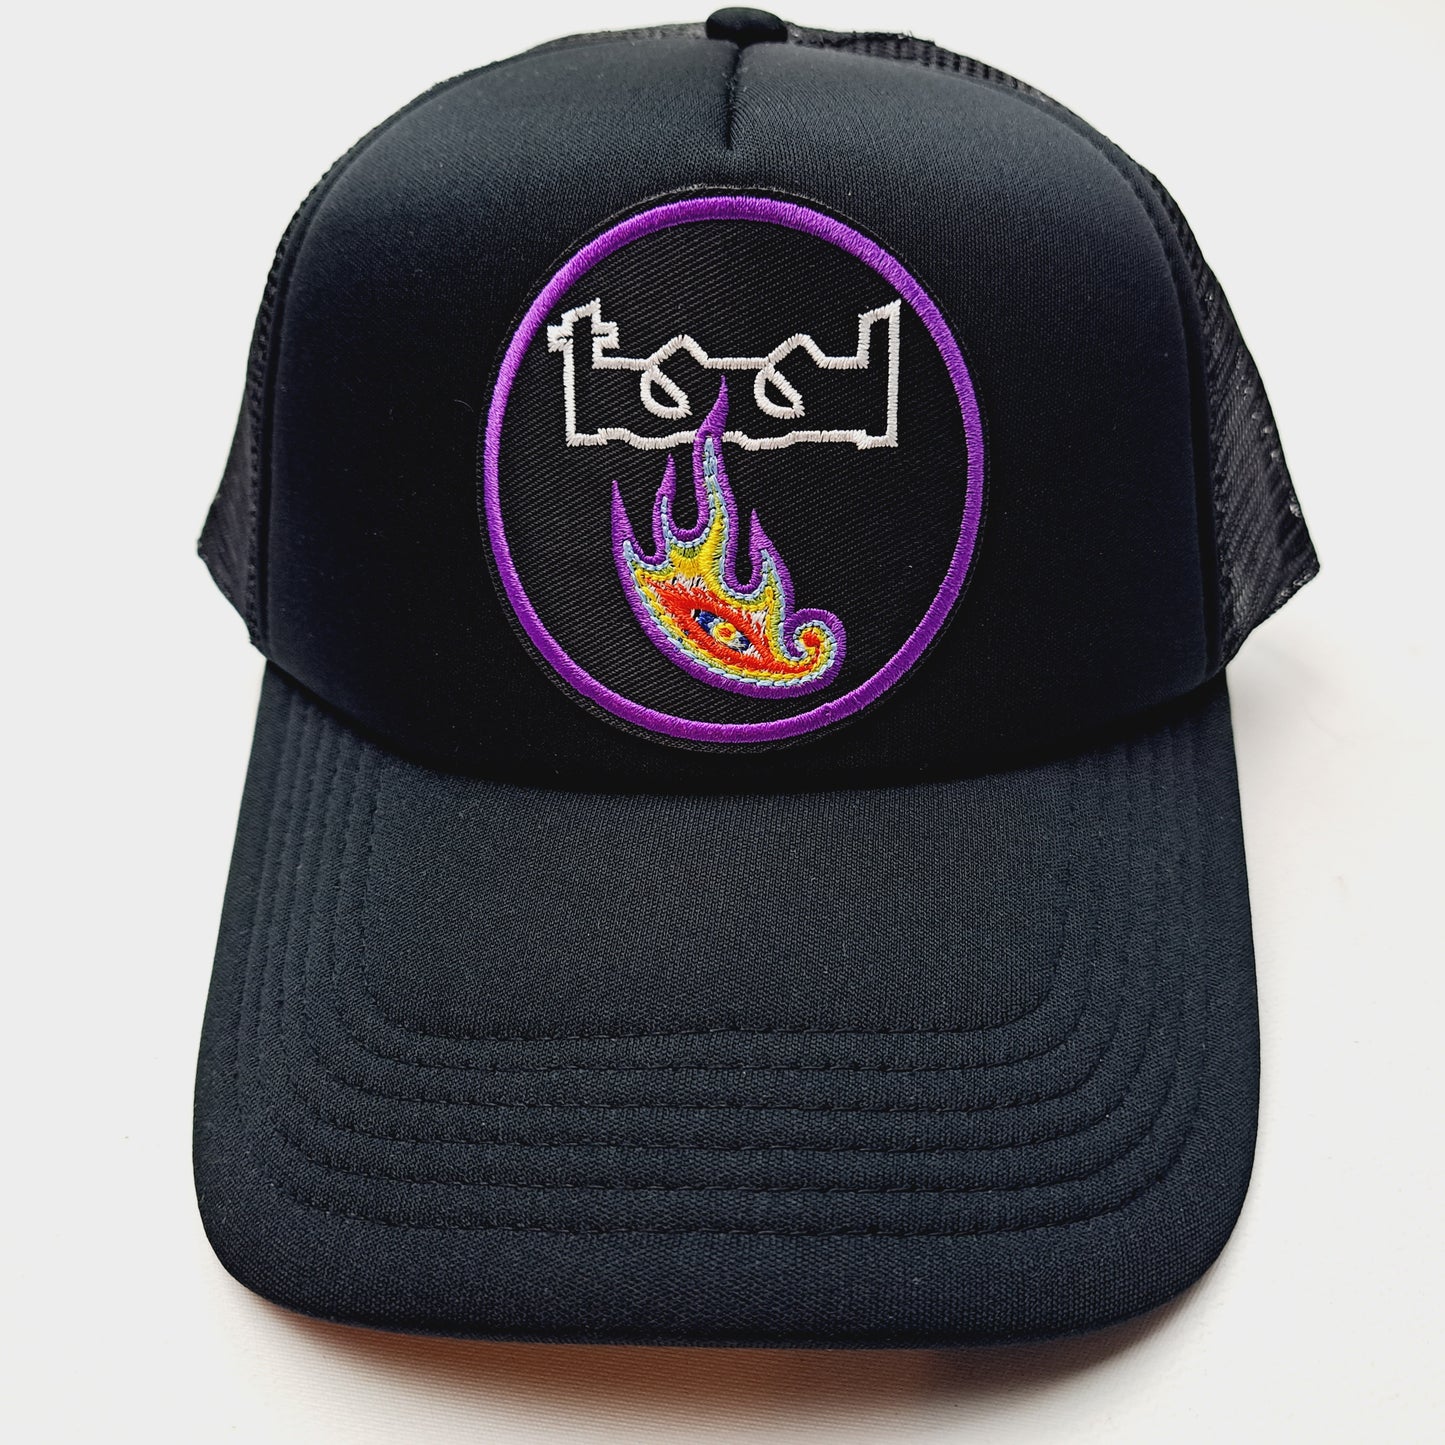 Tool Embroidered Patch Rock Band Foam Mesh Trucker Snapback Black